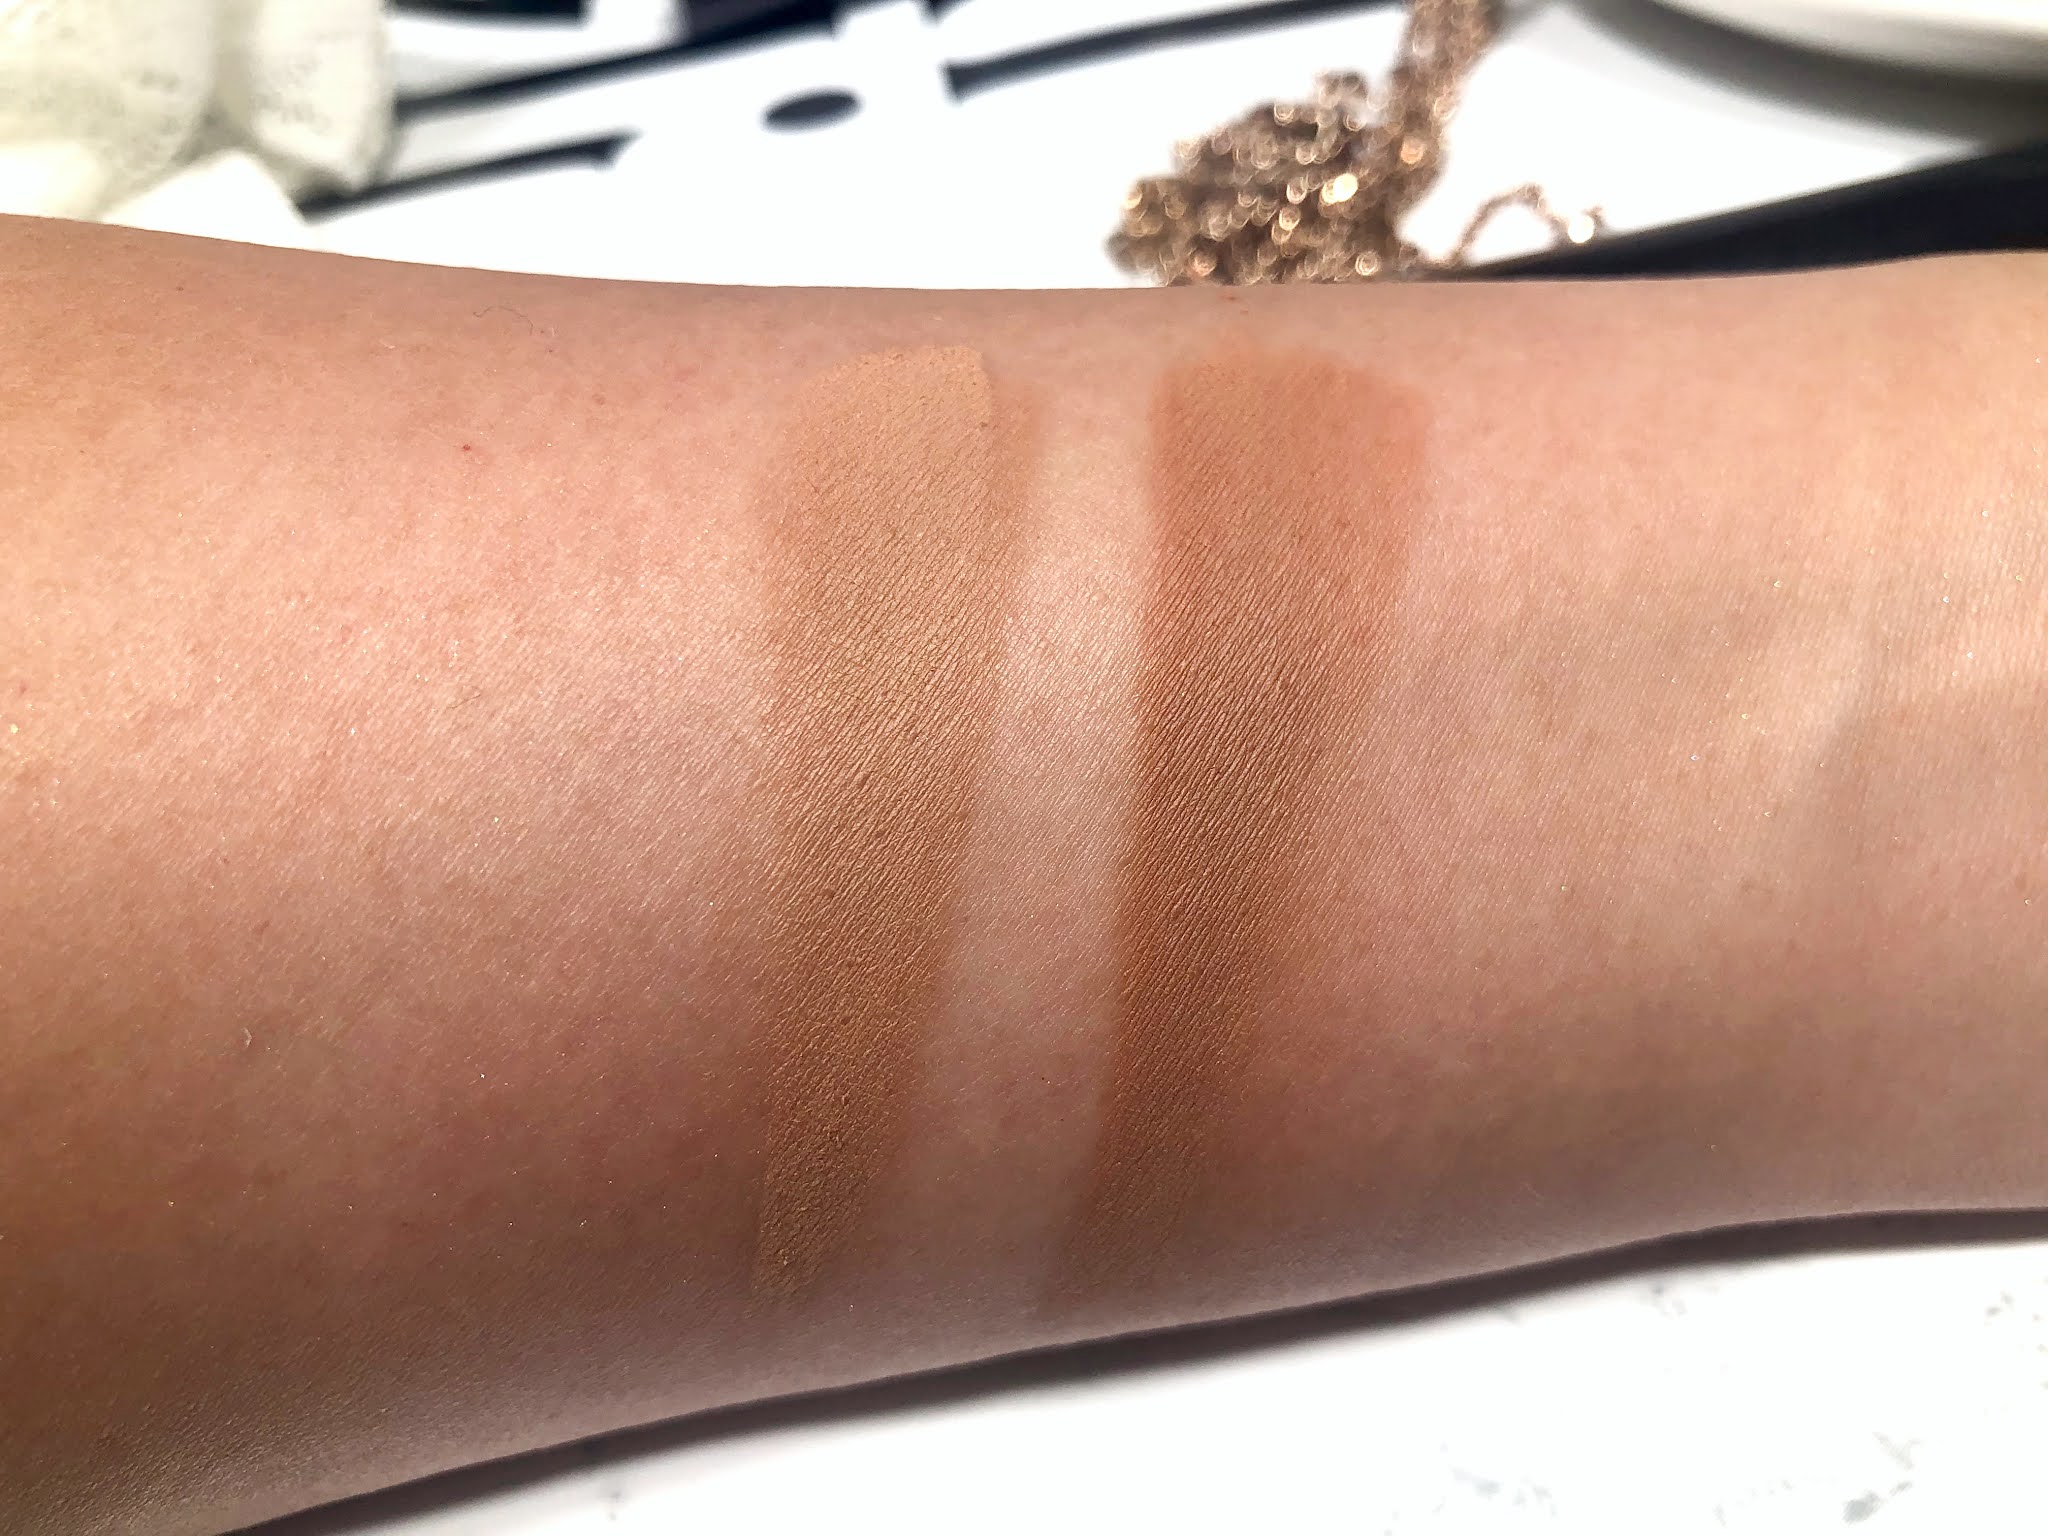 Victoria Beckham Beauty Matte Bronzing Brick Review and Swatches